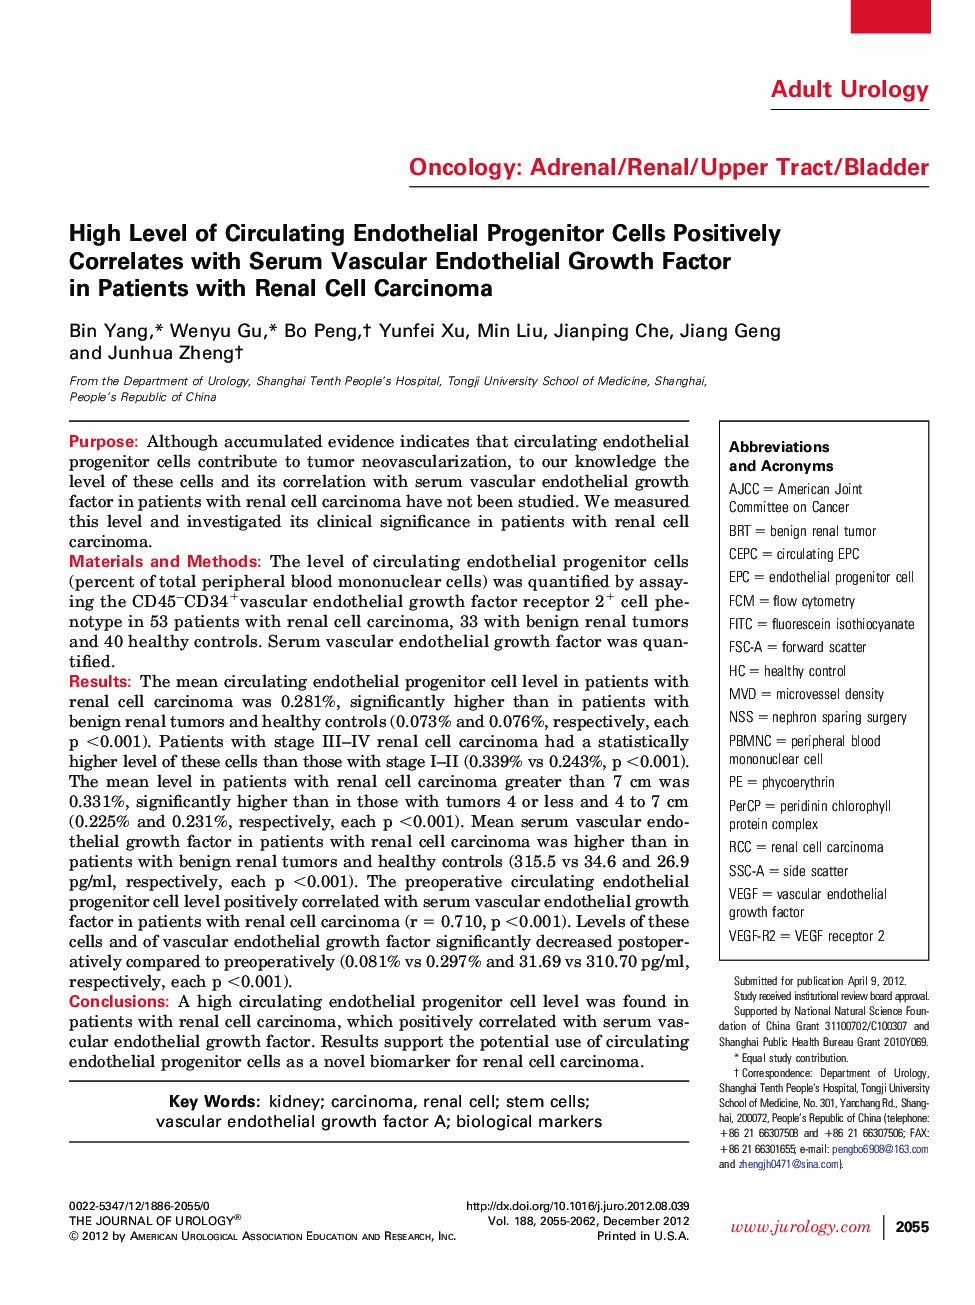 High Level of Circulating Endothelial Progenitor Cells Positively Correlates with Serum Vascular Endothelial Growth Factor in Patients with Renal Cell Carcinoma